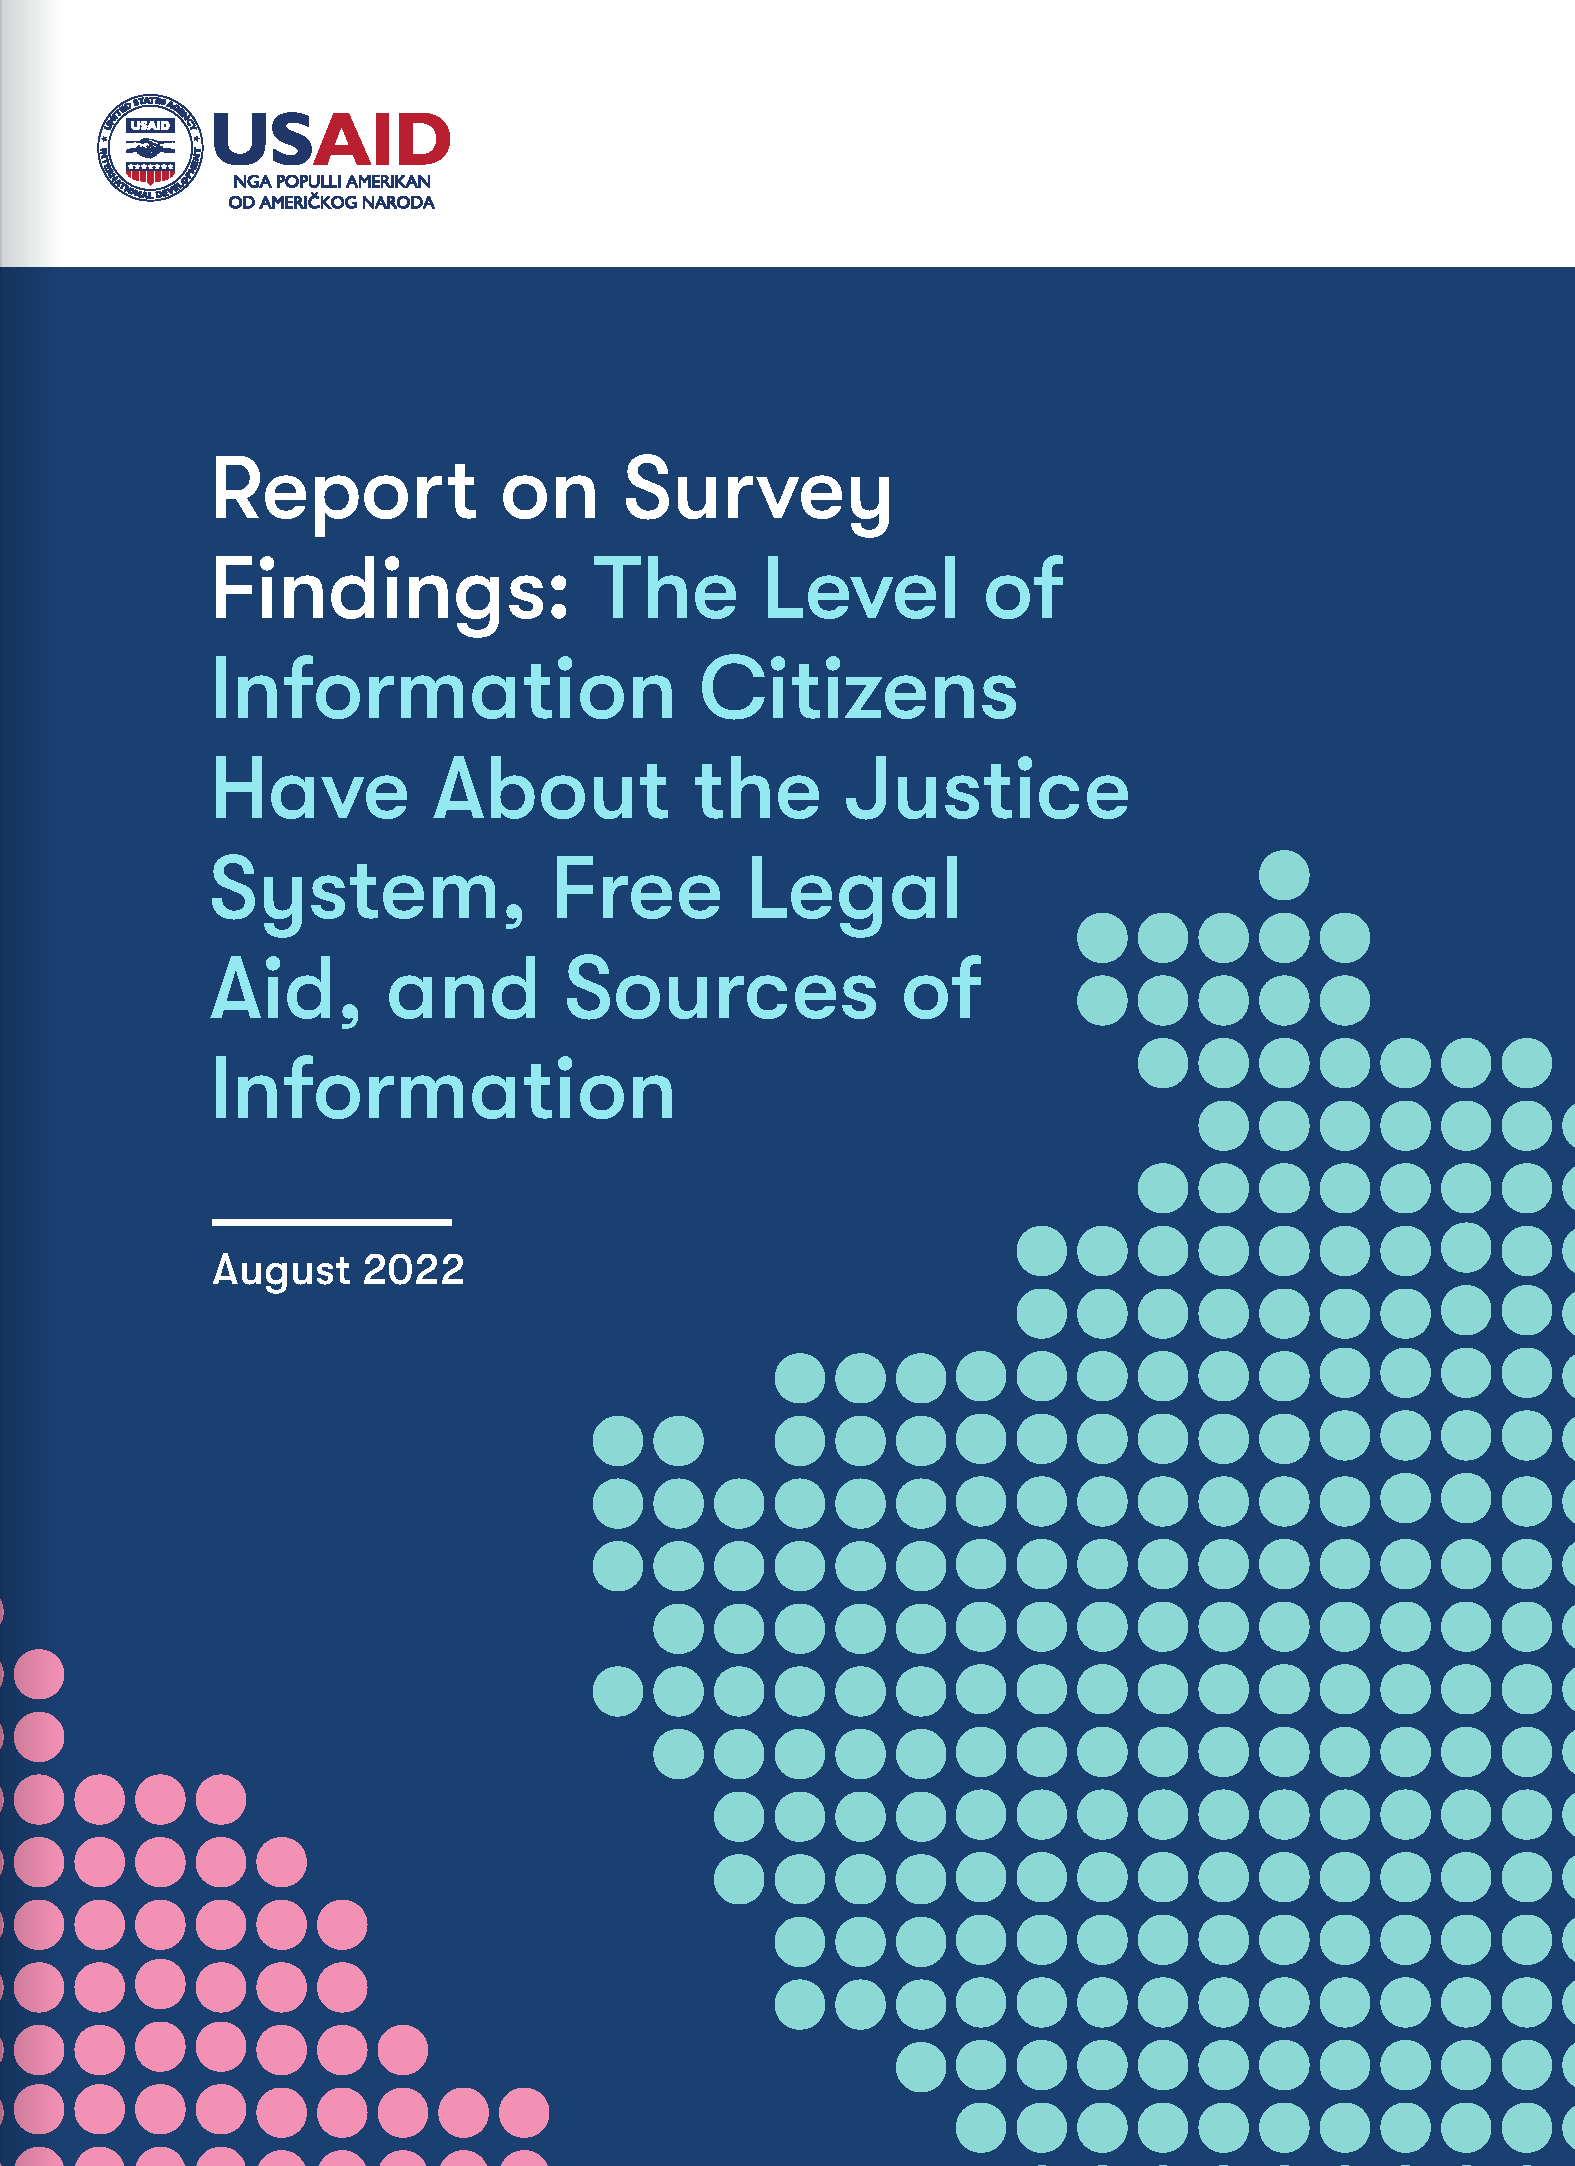 Report on Survey Findings: The Level of Information Citizens Have About the Justice System, Free Legal Aid, and Sources of Information